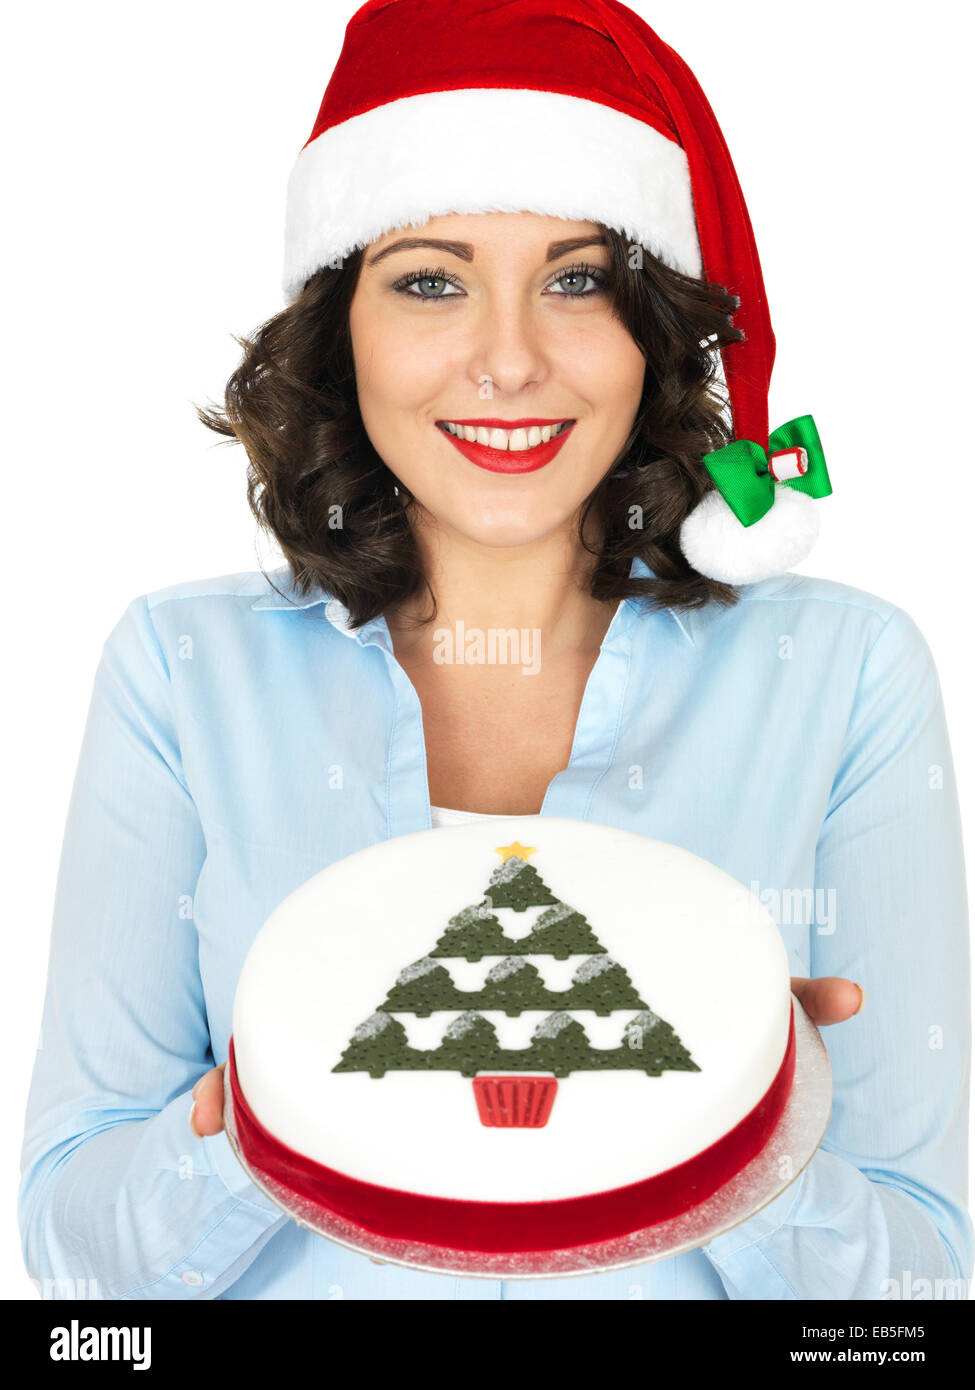 Confident Young Woman Wearing A Red Santa Hat Holding A Rich Iced Christmas Fruit Cake Isolated Against A White Background With A Clipping Path Stock Photo